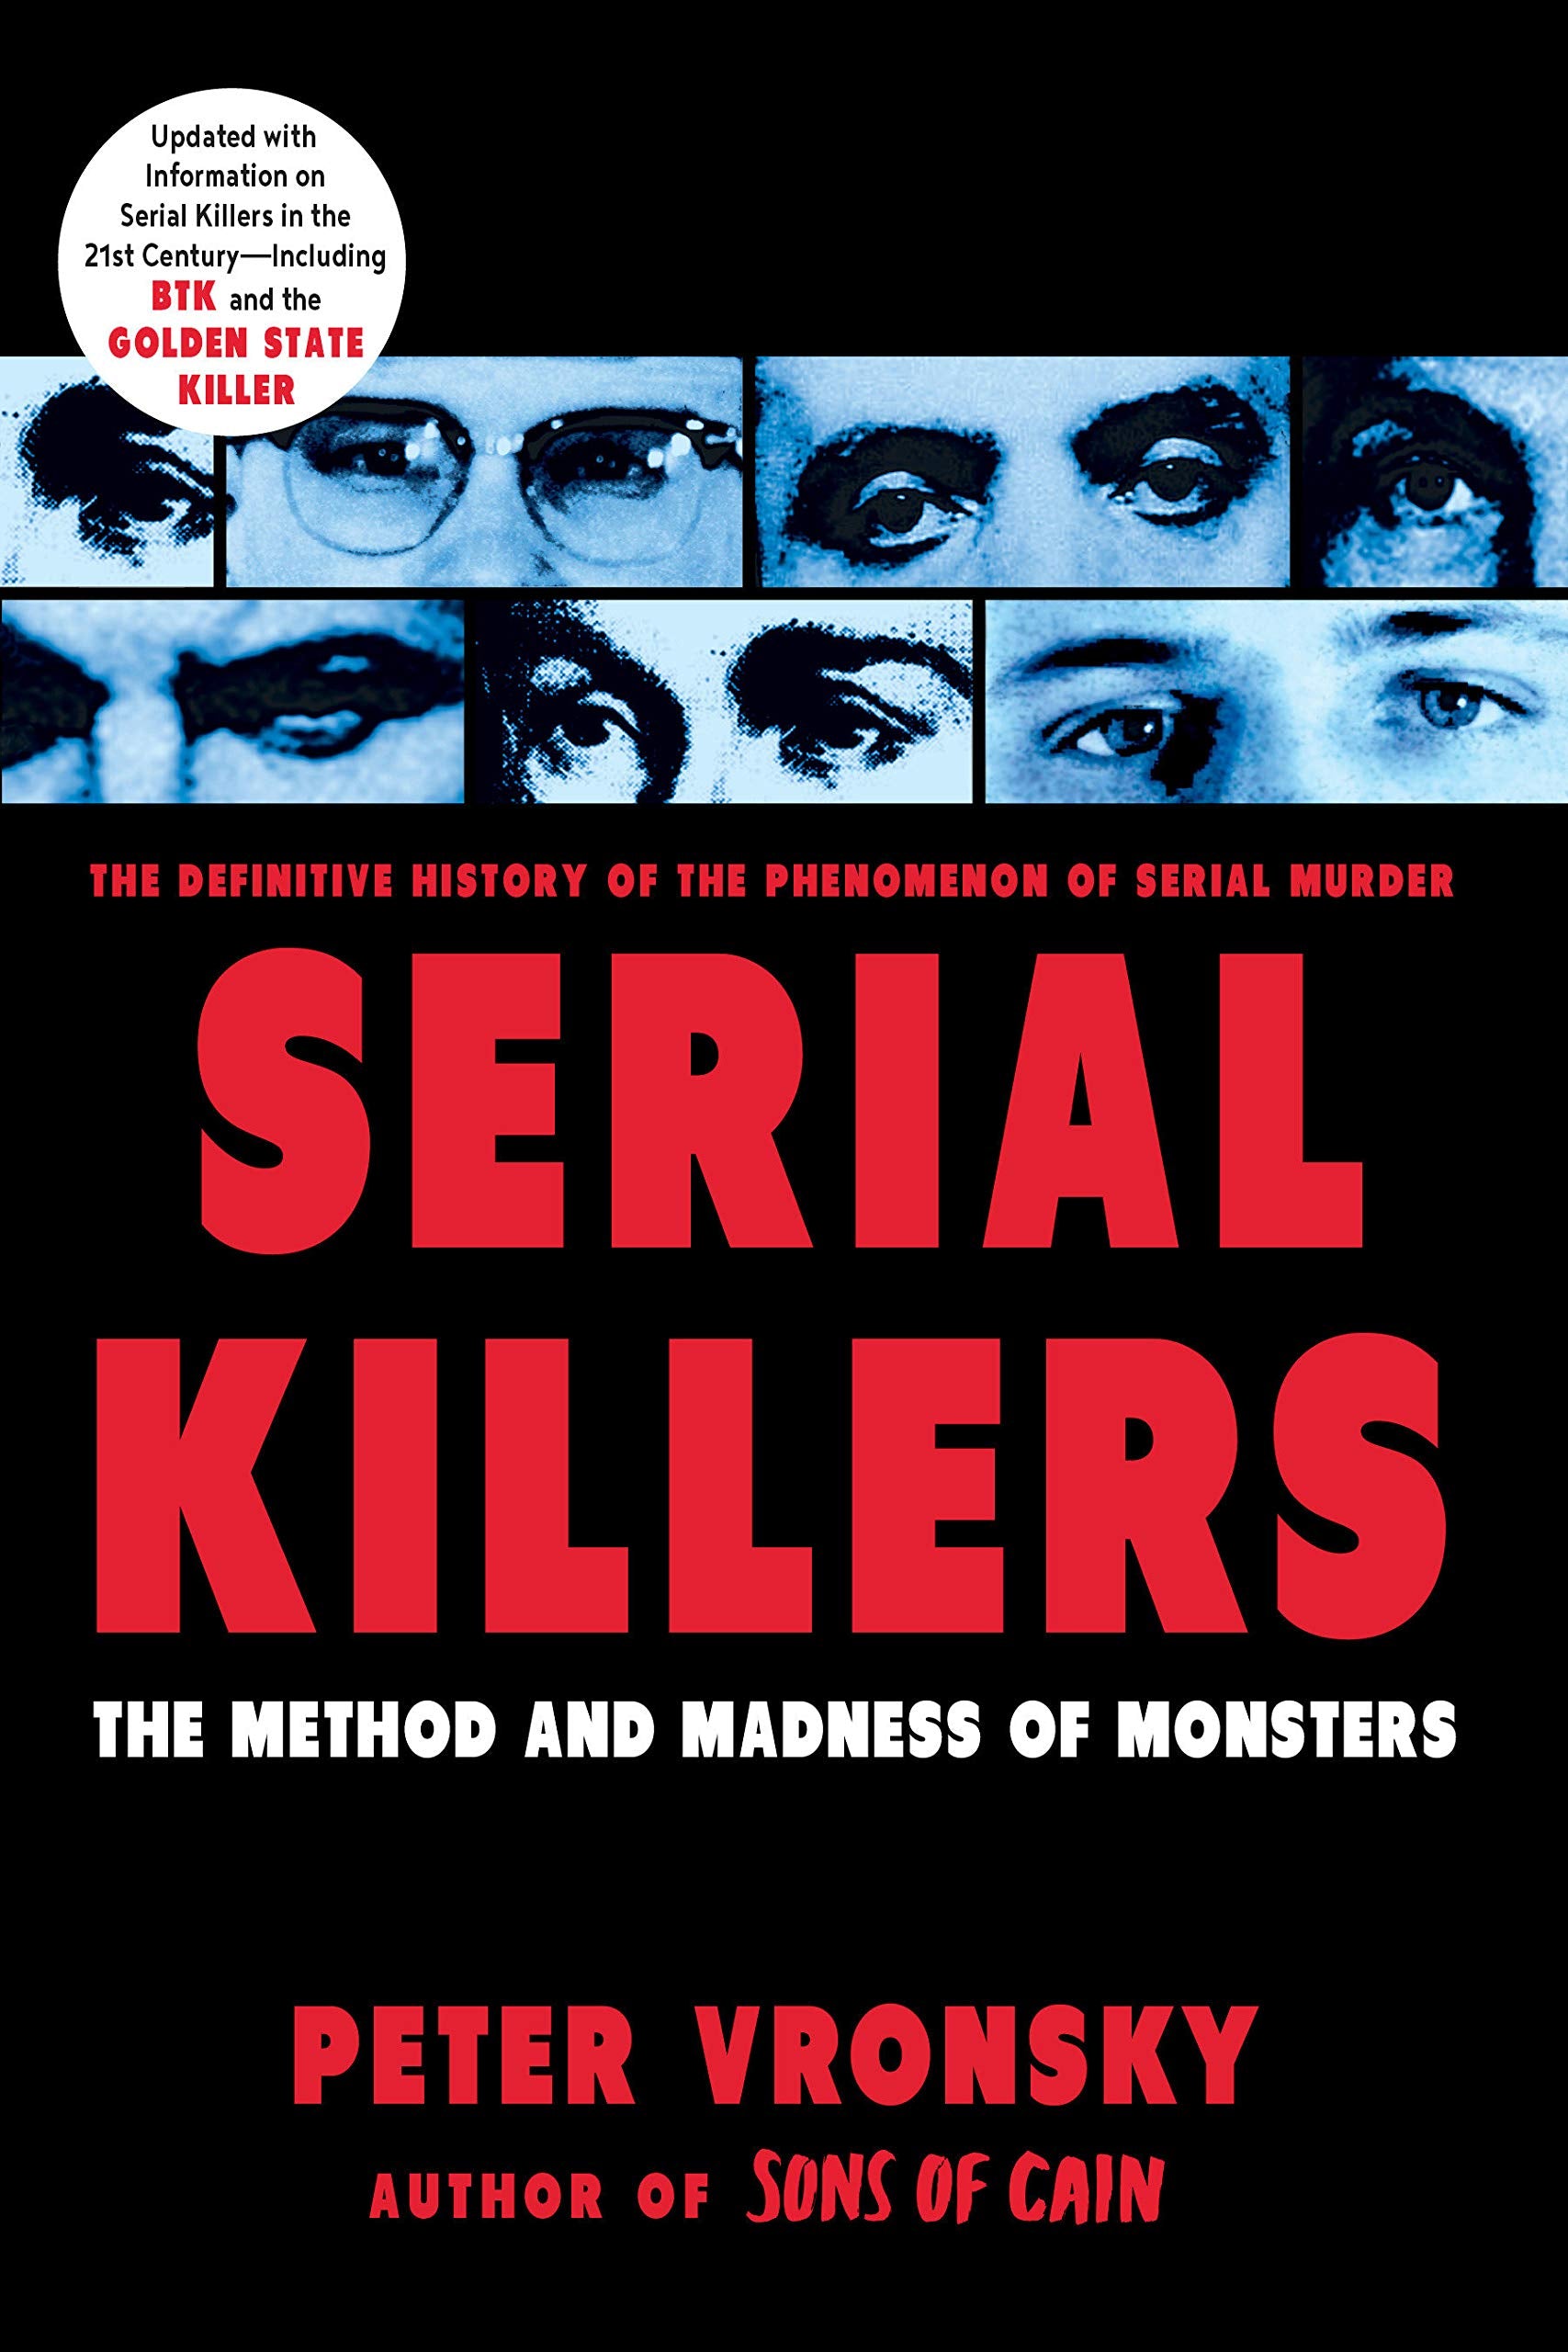 Serial Killers: The Method and Madness of Monsters - SureShot Books Publishing LLC